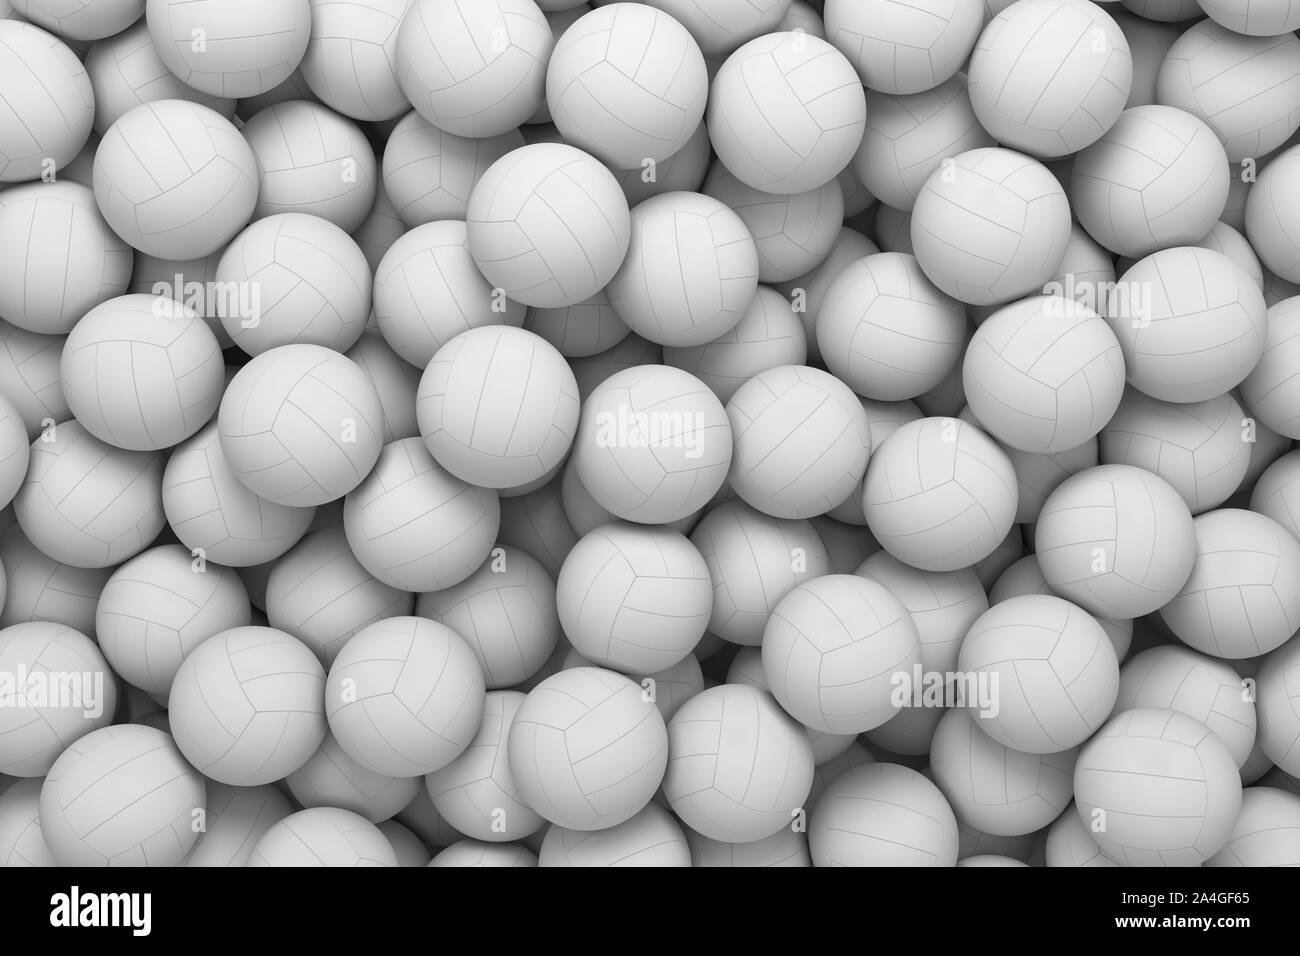 3d rendering of many white volleyball balls lying in an endless pile as ...